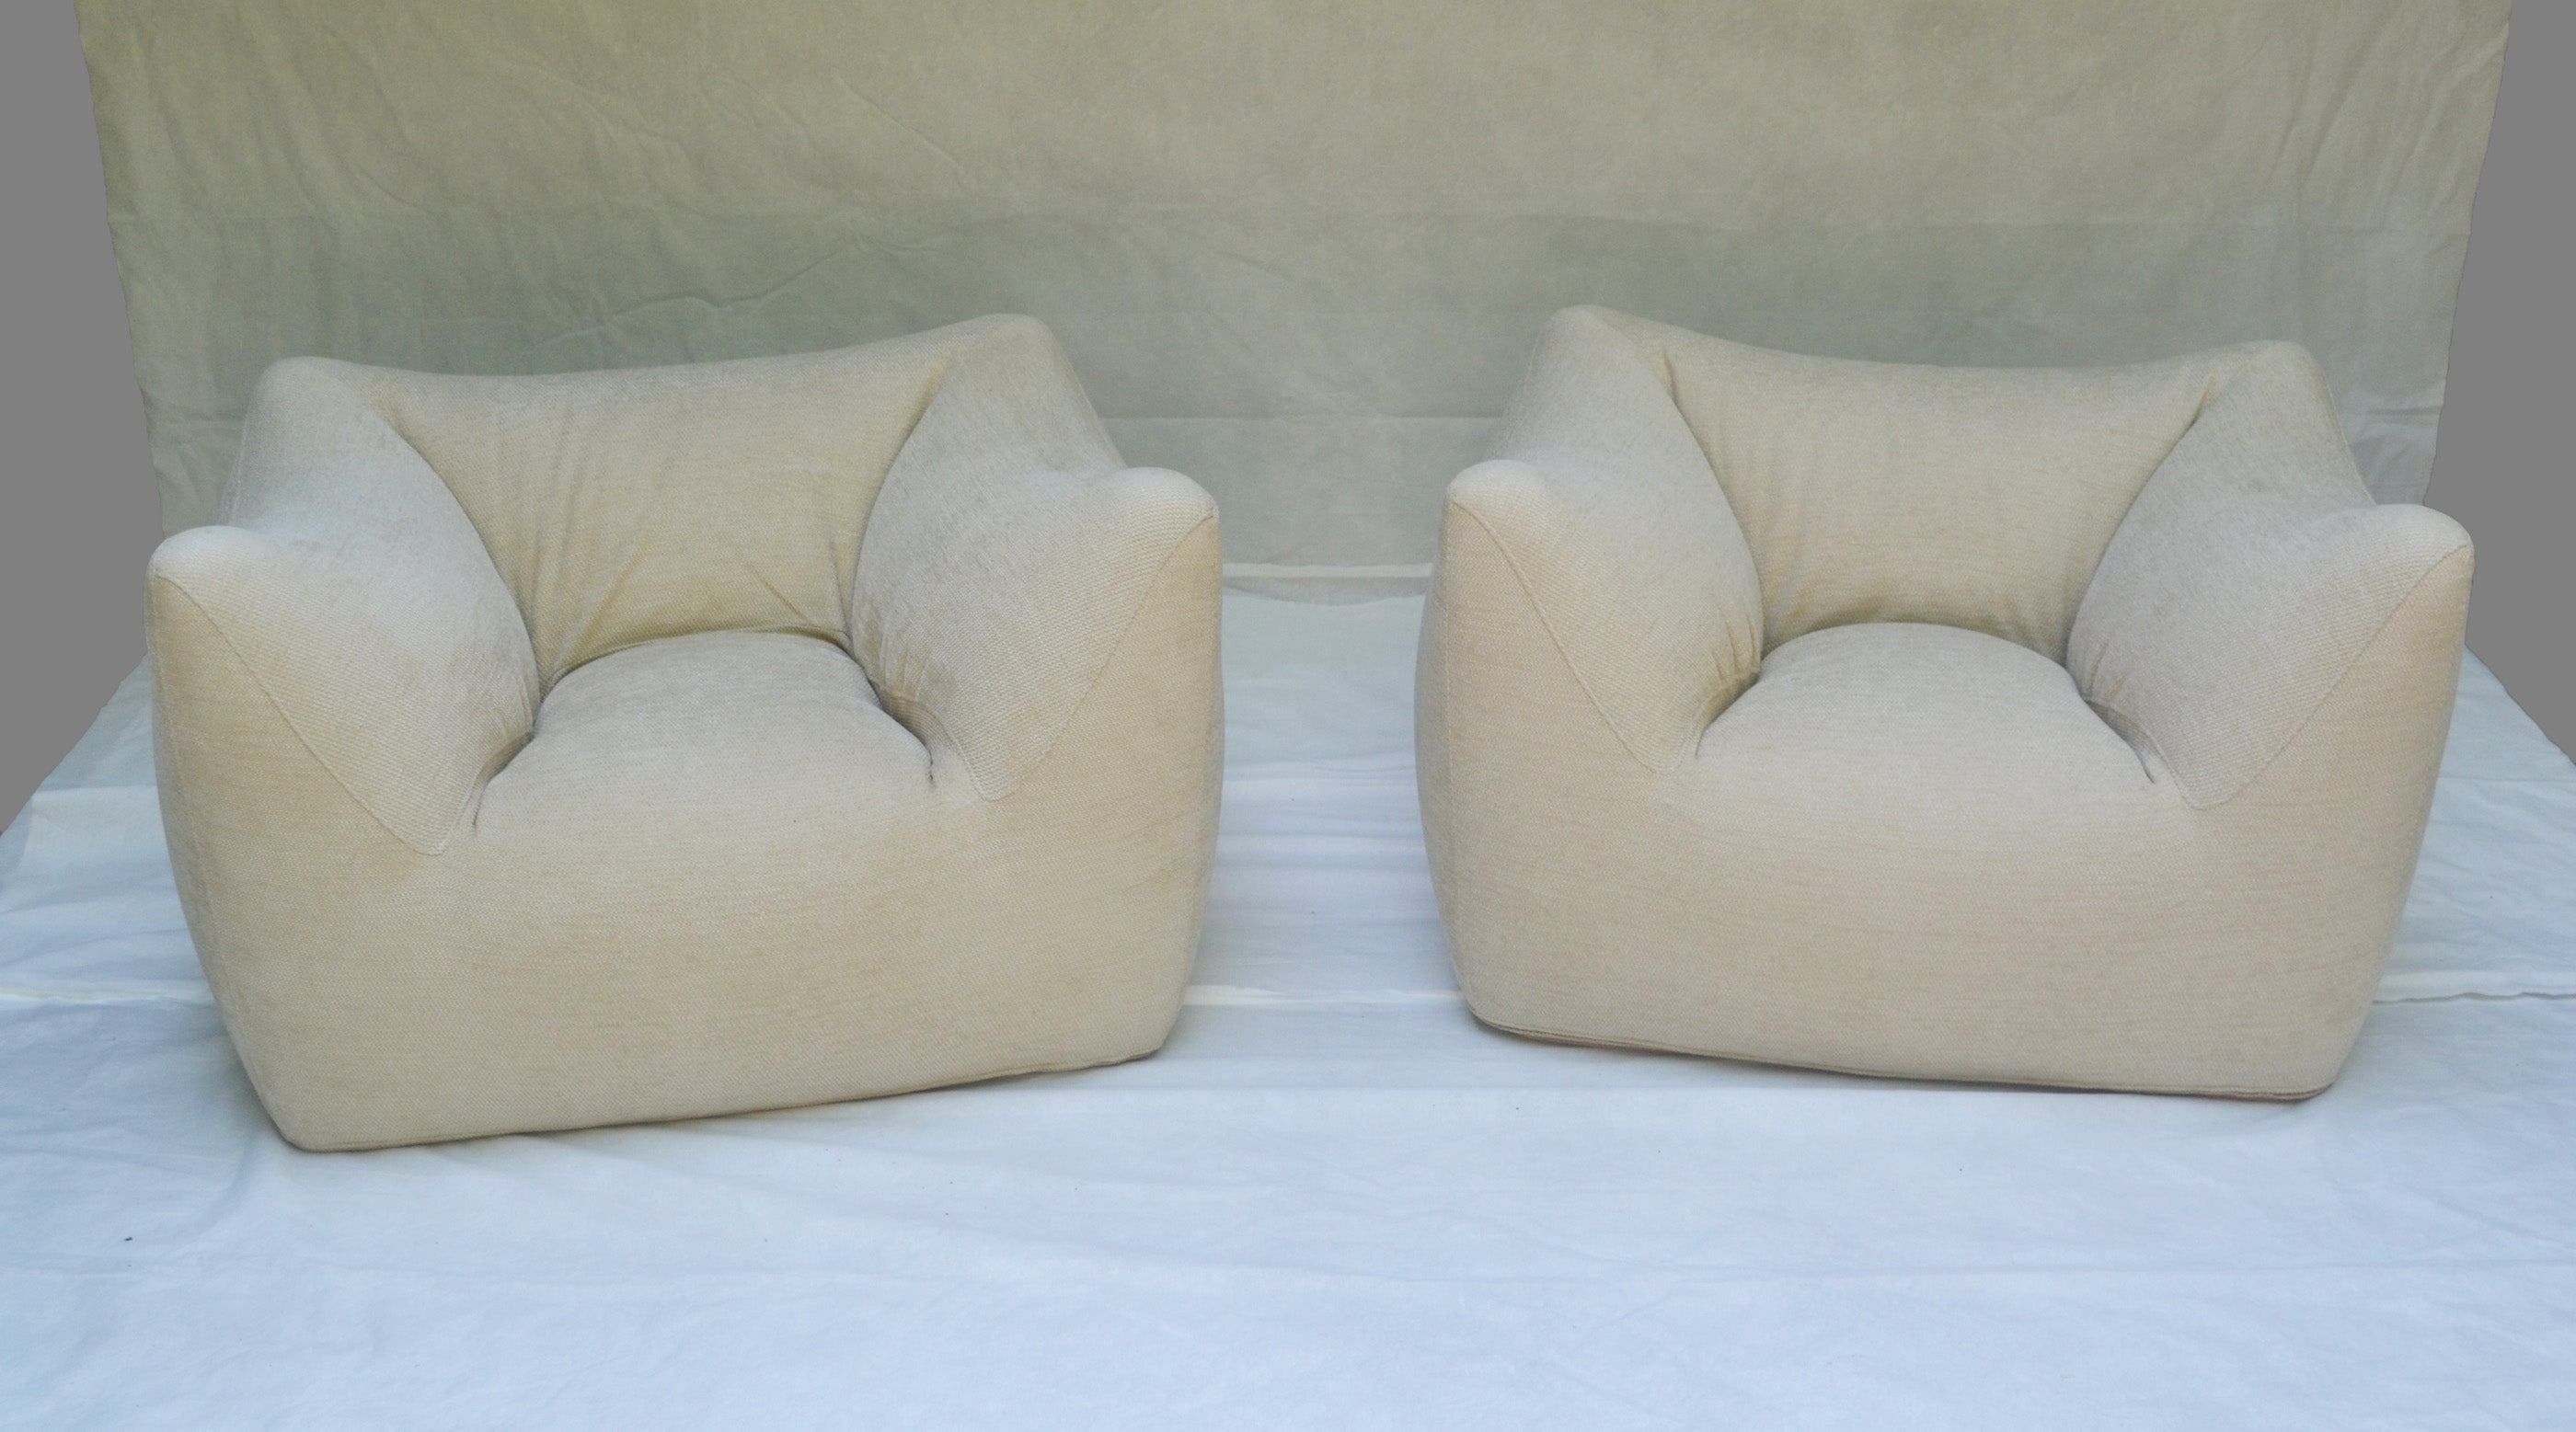 Pair of Le Bambole Lounge Chairs by Mario Bellini 1972